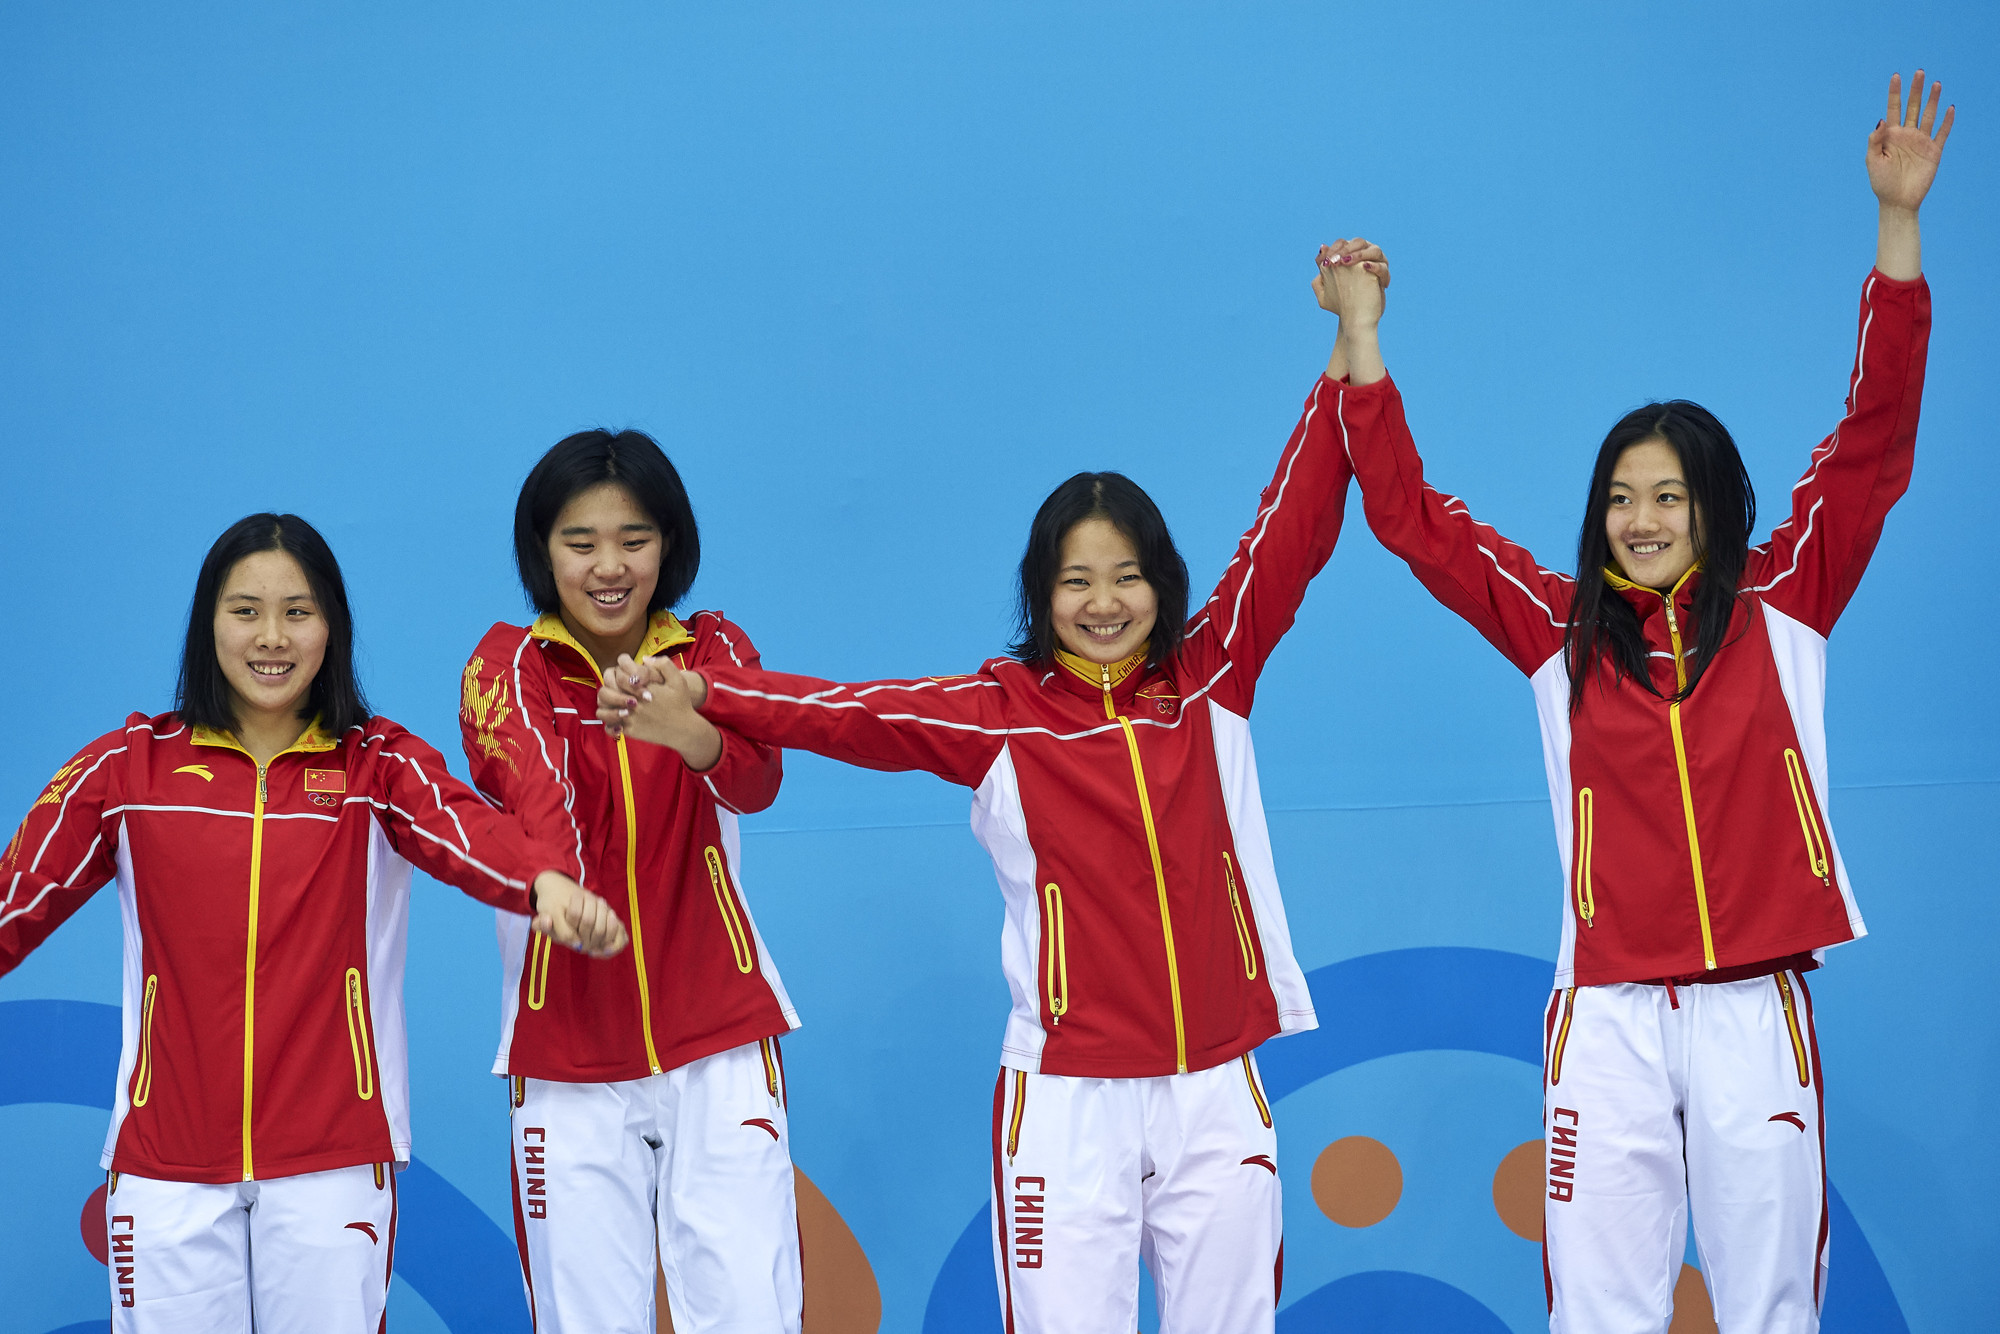 One of China's three short course swimming gold medals today came in the women's 4x50 metres freestyle relay ©Ashgabat 2017/Nikita Bossav/Laurel Photo Services